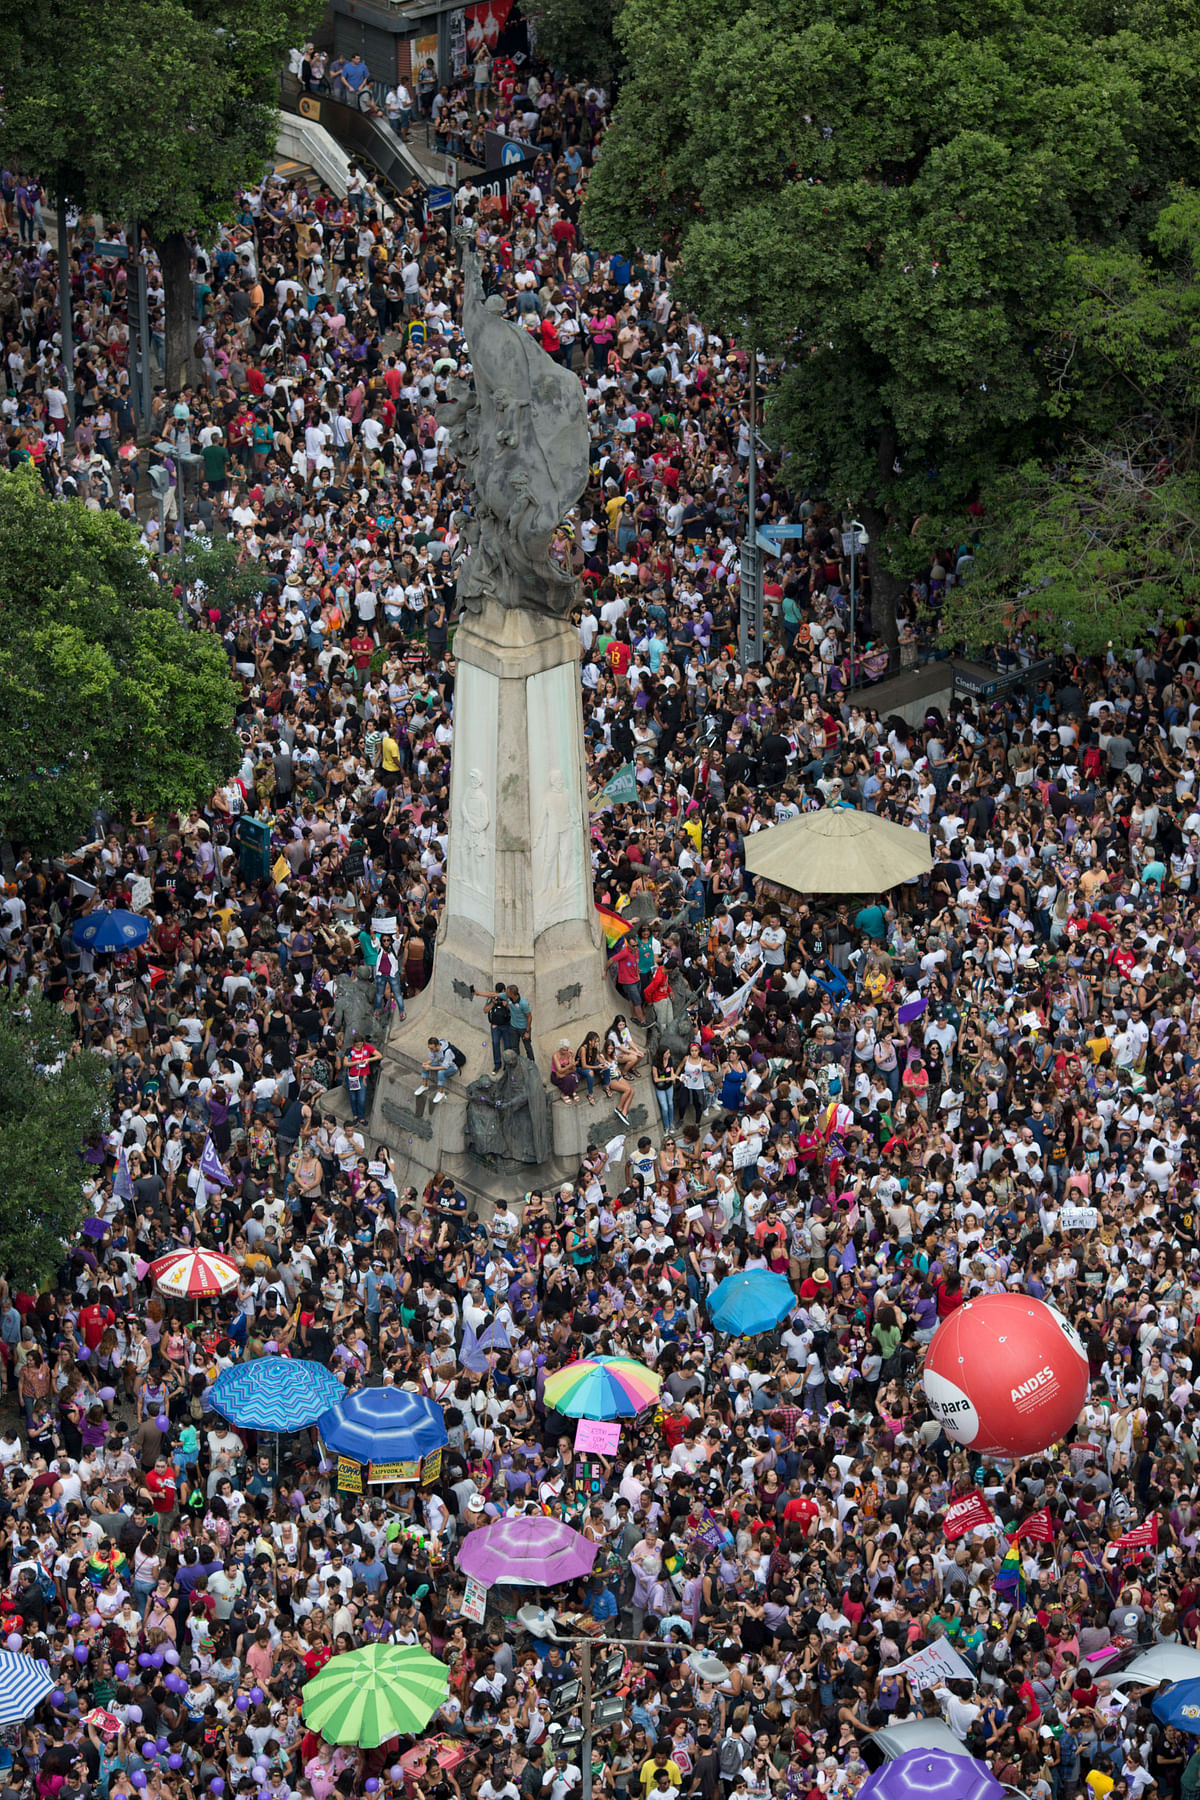 In Sao Paulo, Rio de Janeiro and Brasilia, people flooded avenues and squares to sing, dance and shout “Not him!”